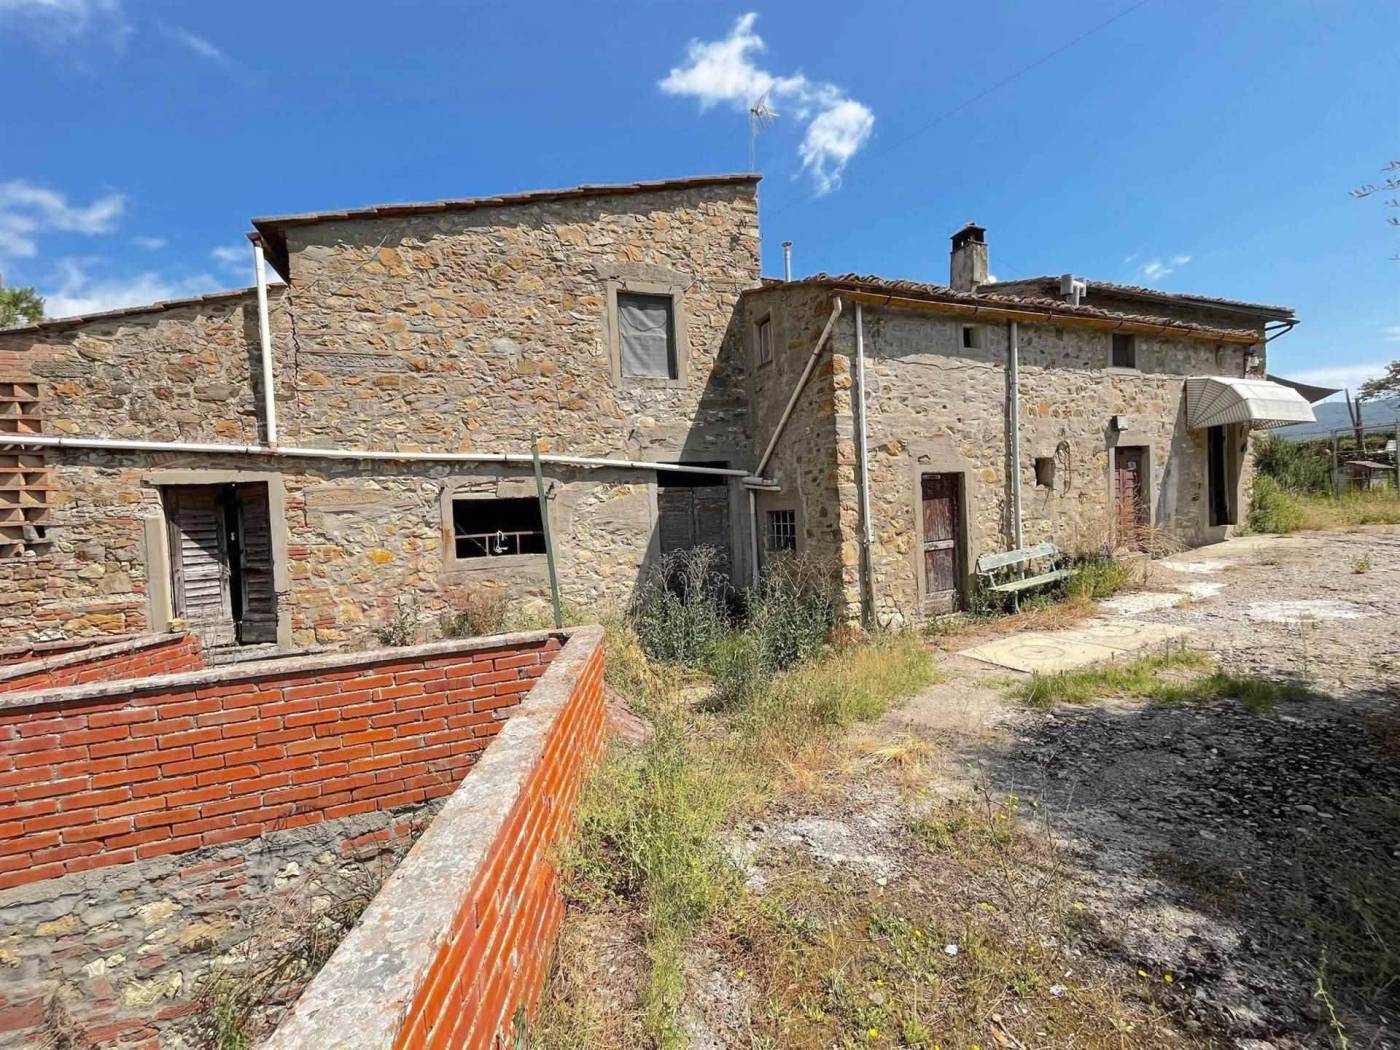 REF: VE000PICAR - GREVE IN CHIANTI FARMHOUSE 130 SQM WITH STABLE AND ANNEXES for a tot. 140 m2. Yard and land. Eu.400,000 Greve in Chianti/CASTEL 